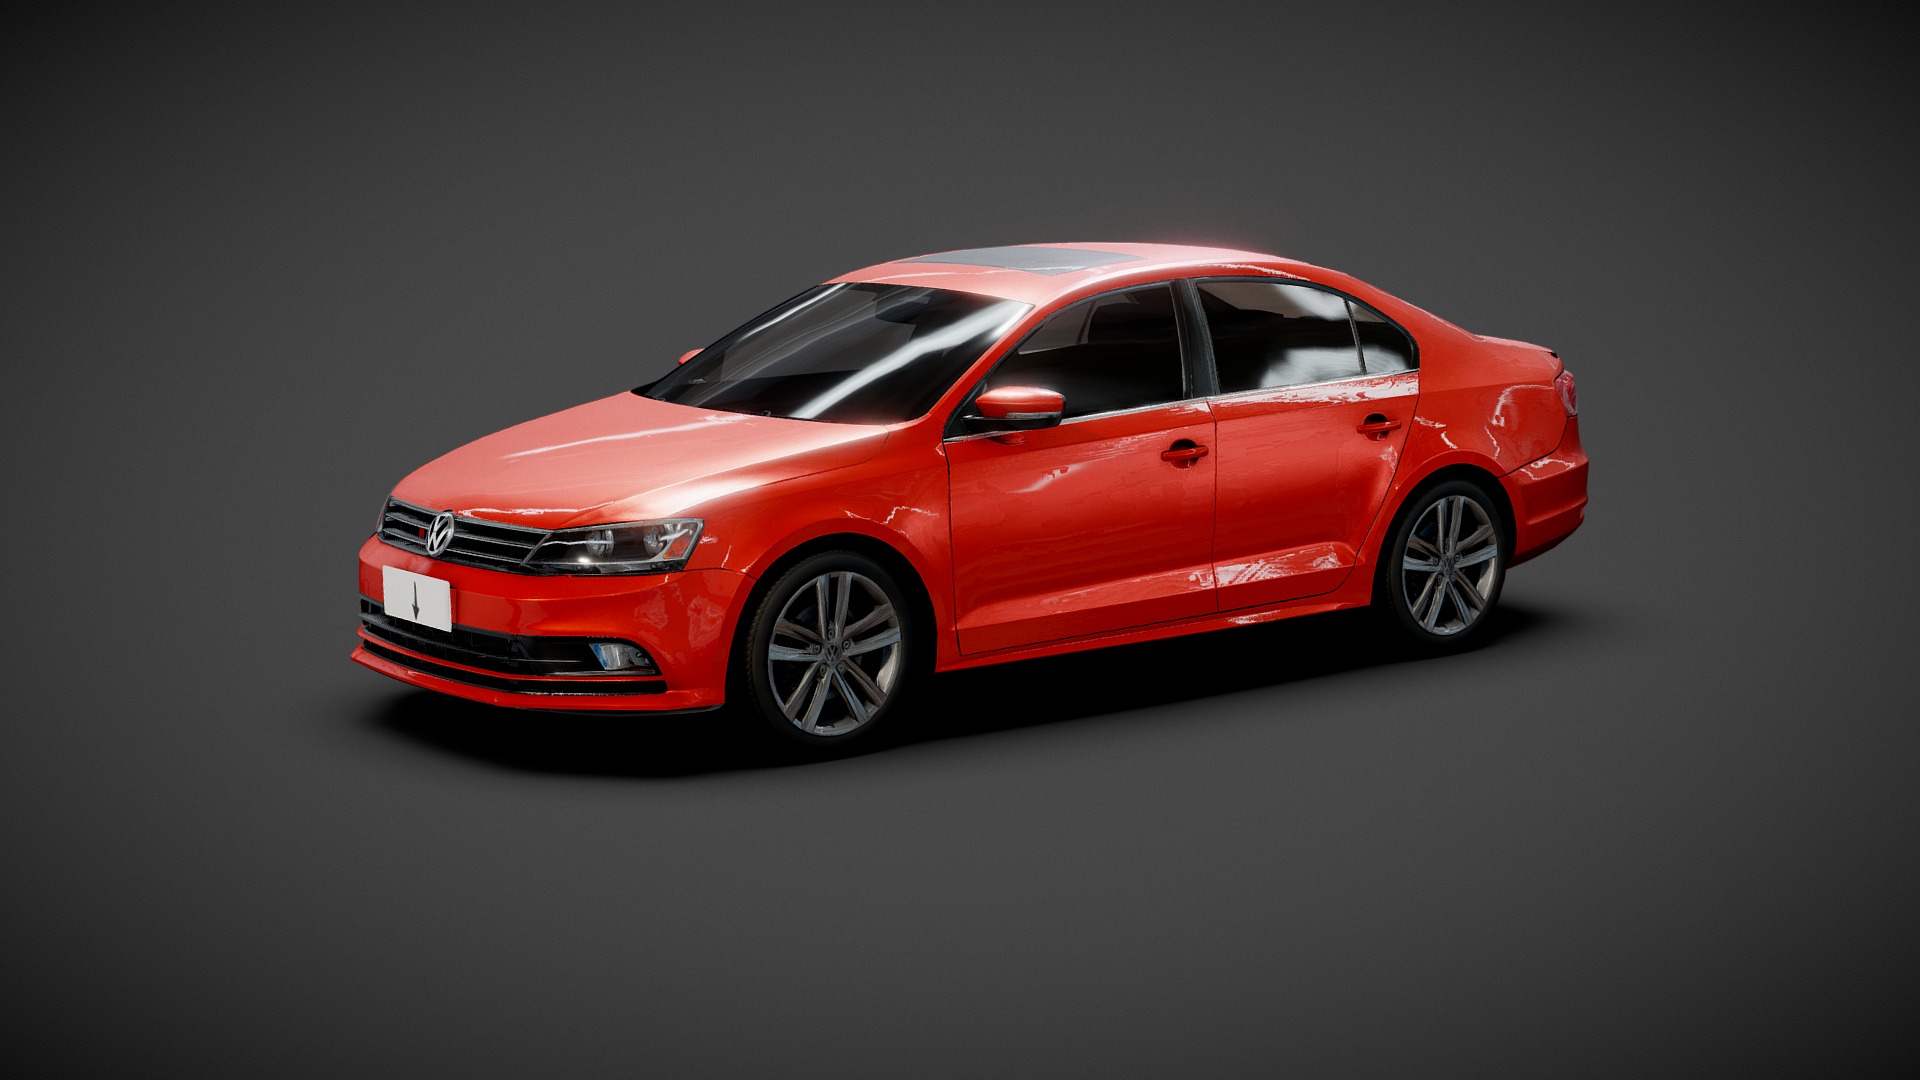 3D model VW Jetta 2015 - This is a 3D model of the VW Jetta 2015. The 3D model is about a red car on a white background.